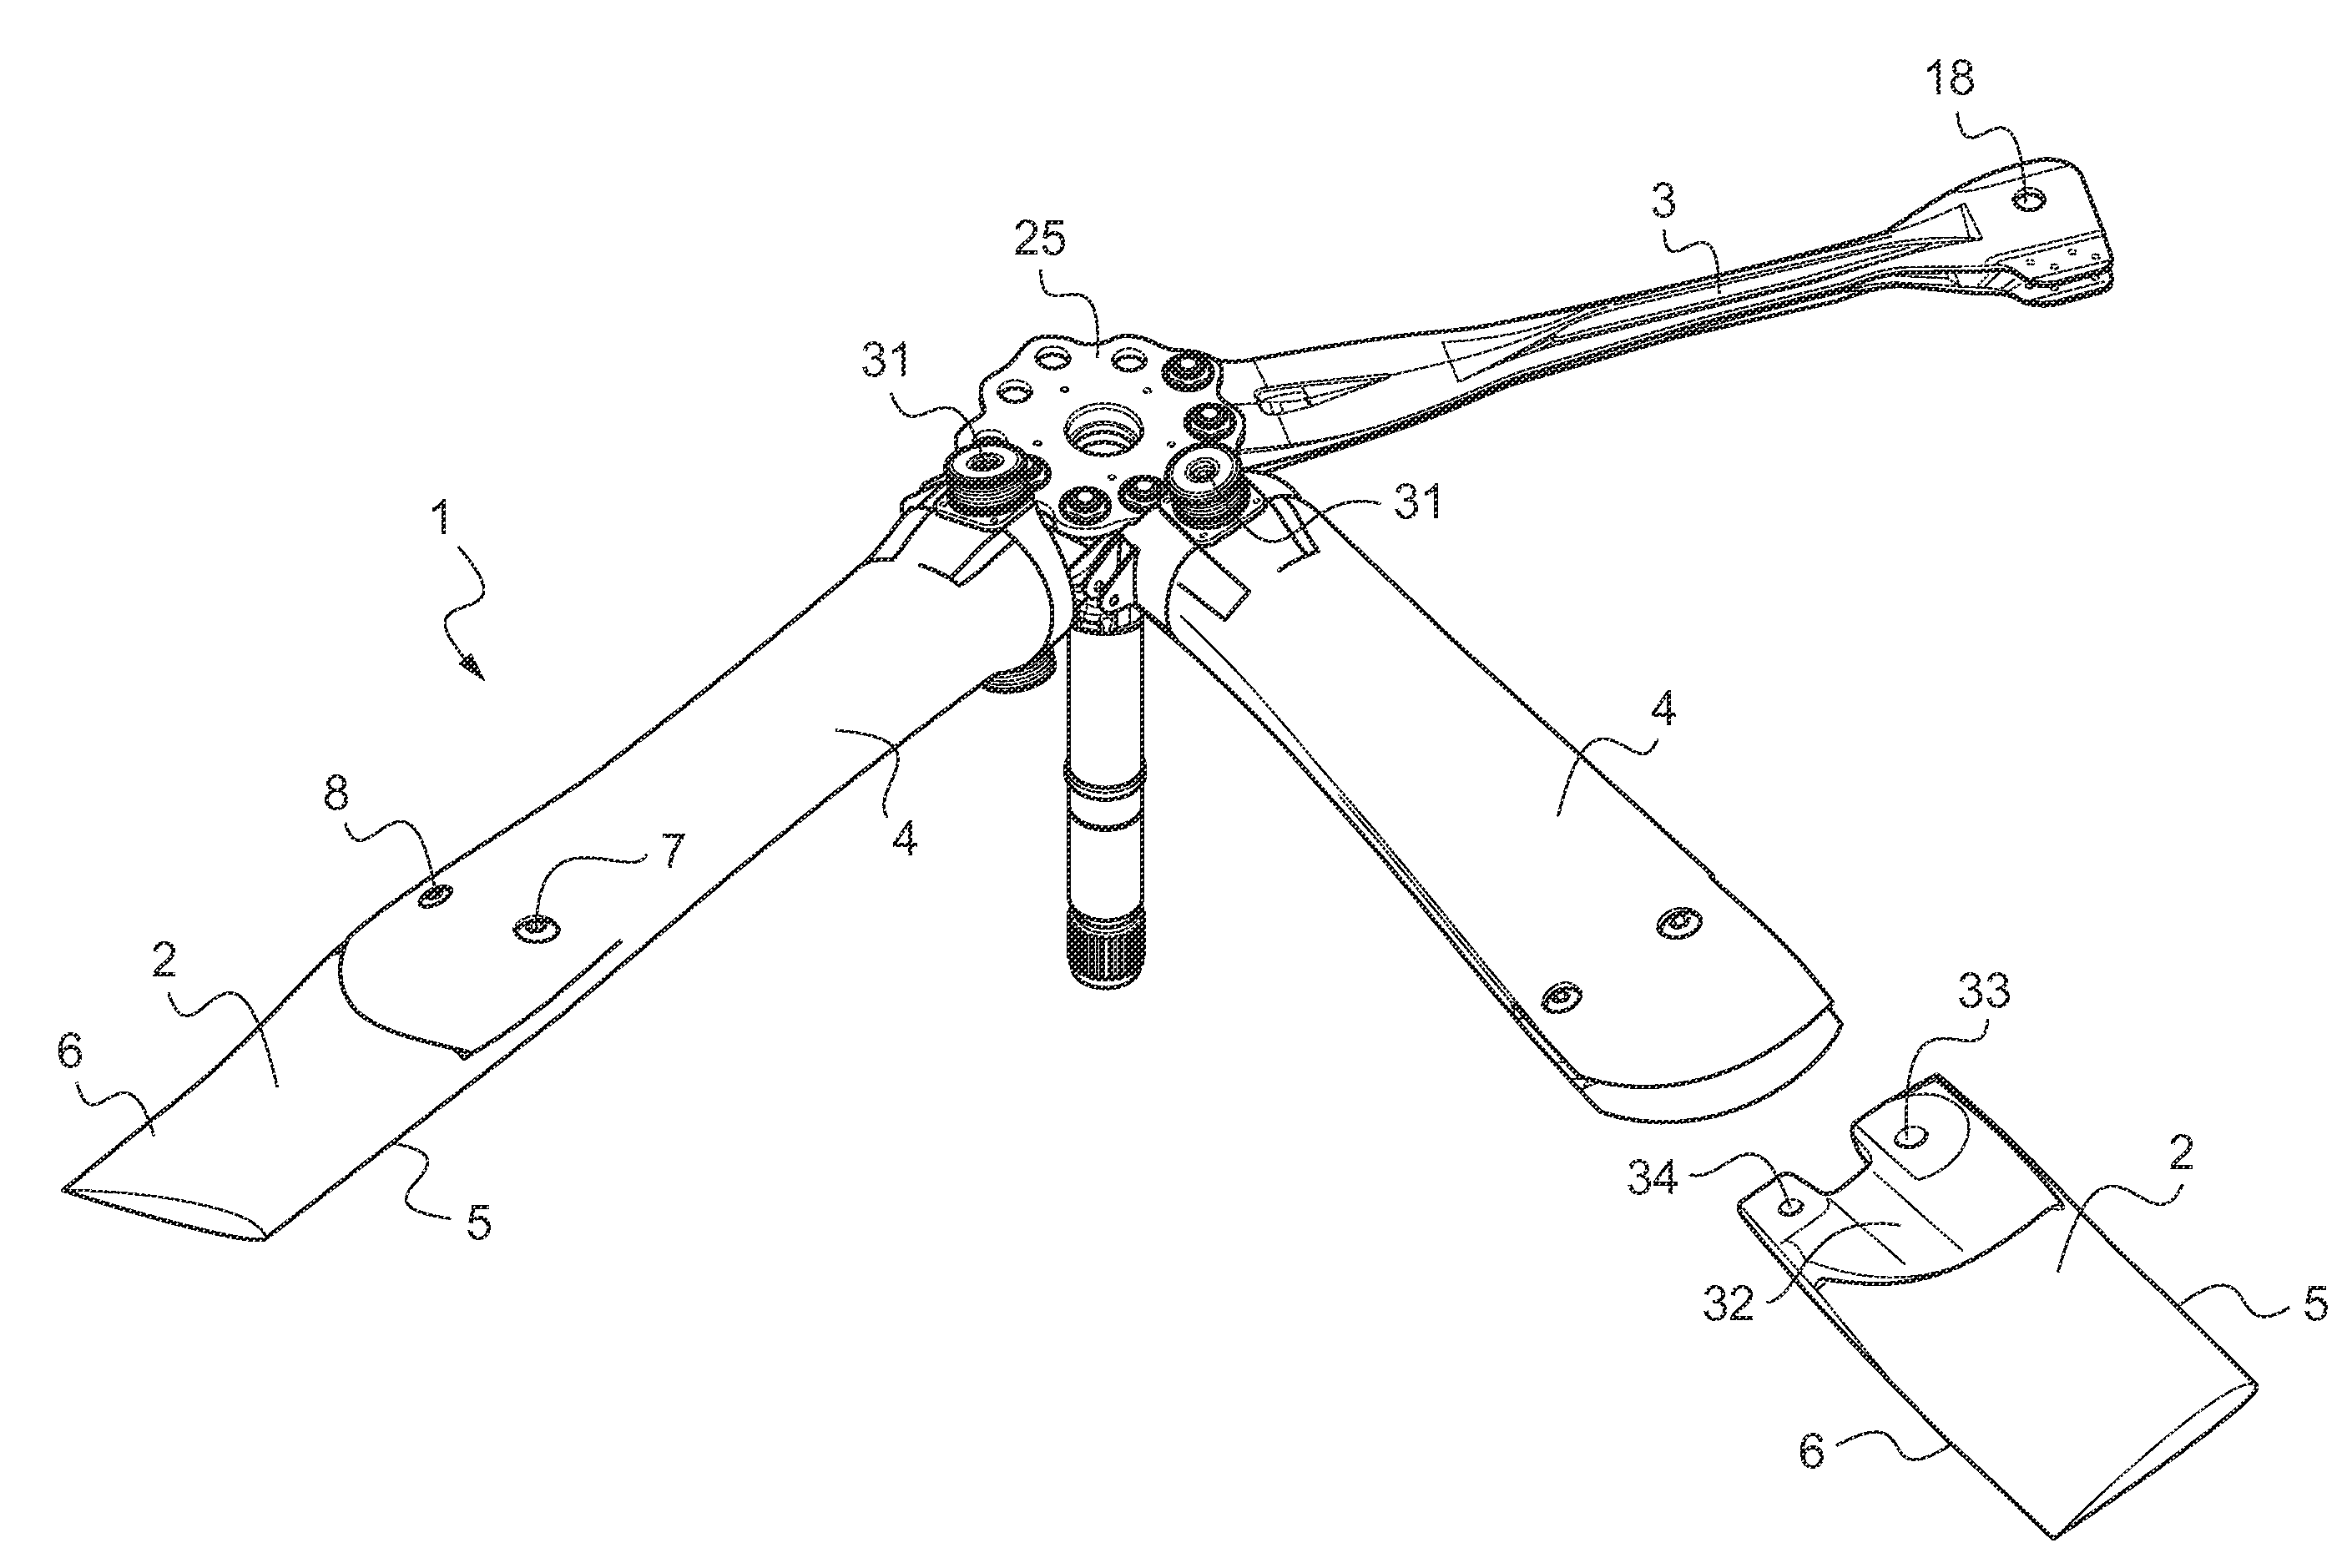 Airfoil blade of a bearingless rotor of a helicopter